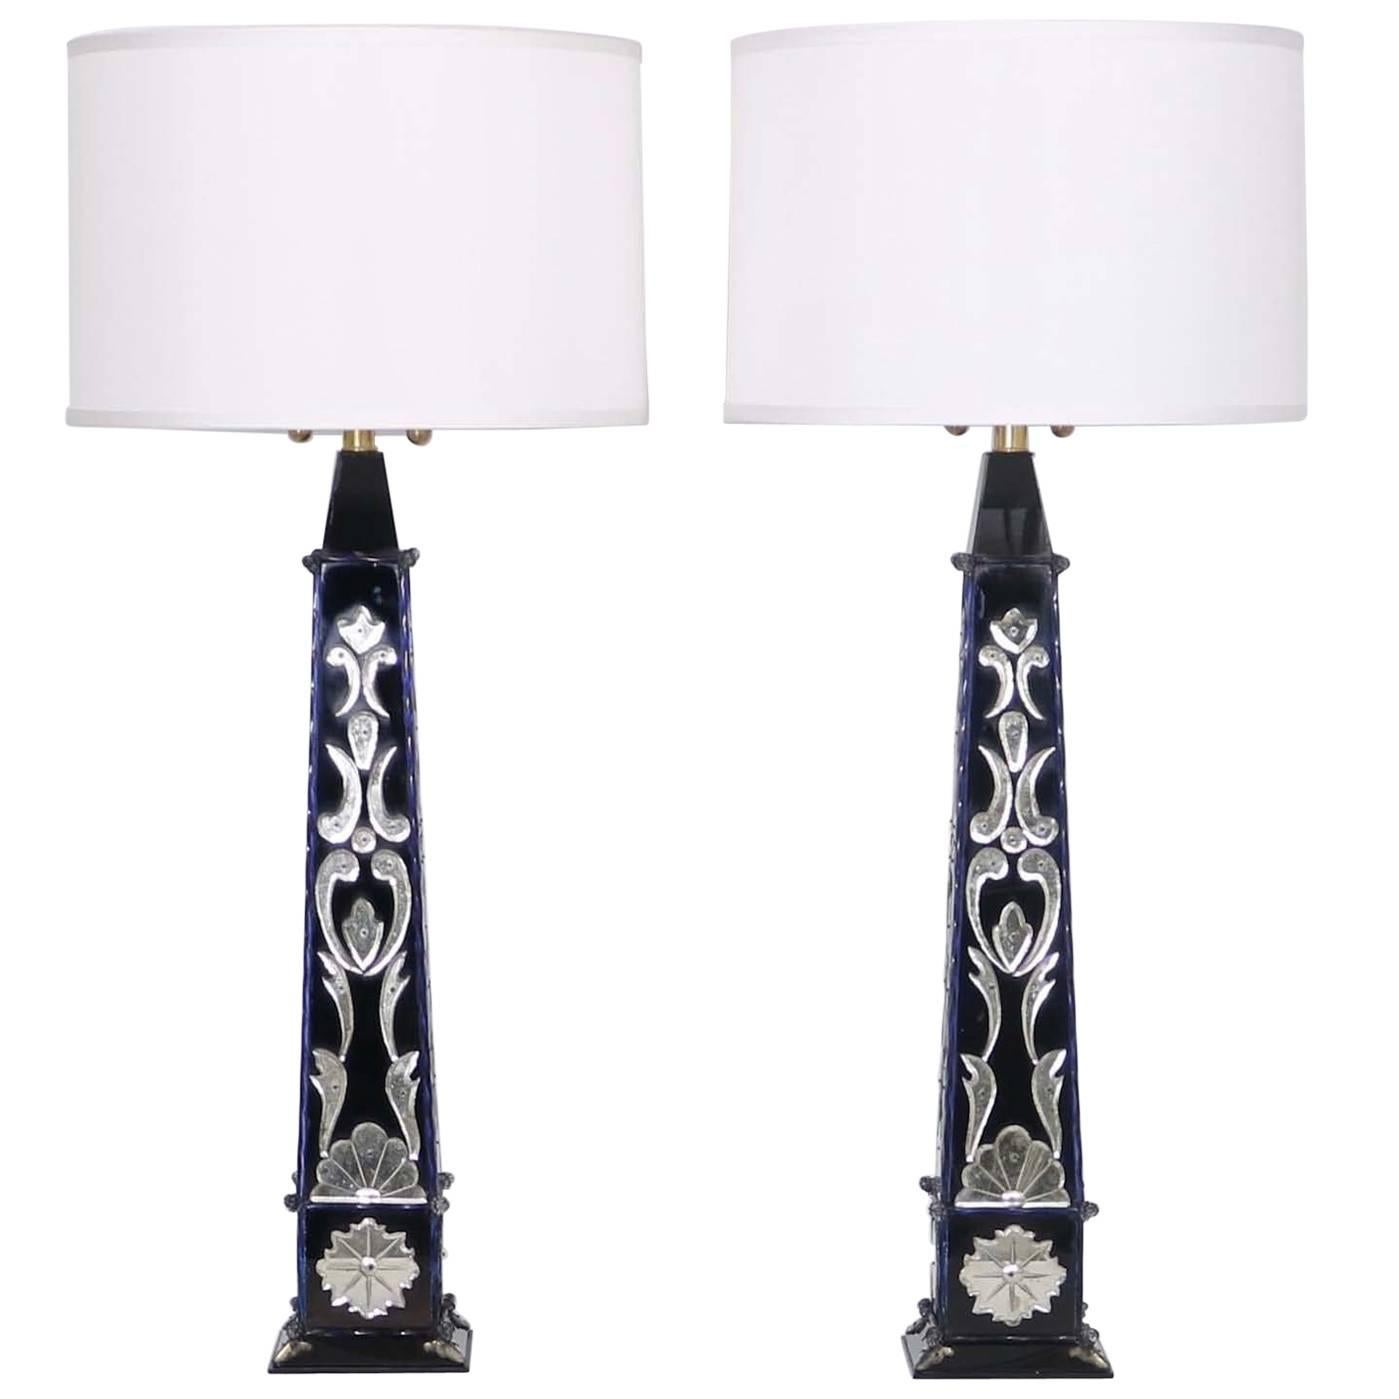 Monumental pair of Mid-Century Modern Venetian mirror Obelisk lamps, produced circa 1950s, each side with the same artistic work. The noted height is to the finial, height to the top of the mirrored body is 27.5 in (70 cm). Excellent vintage